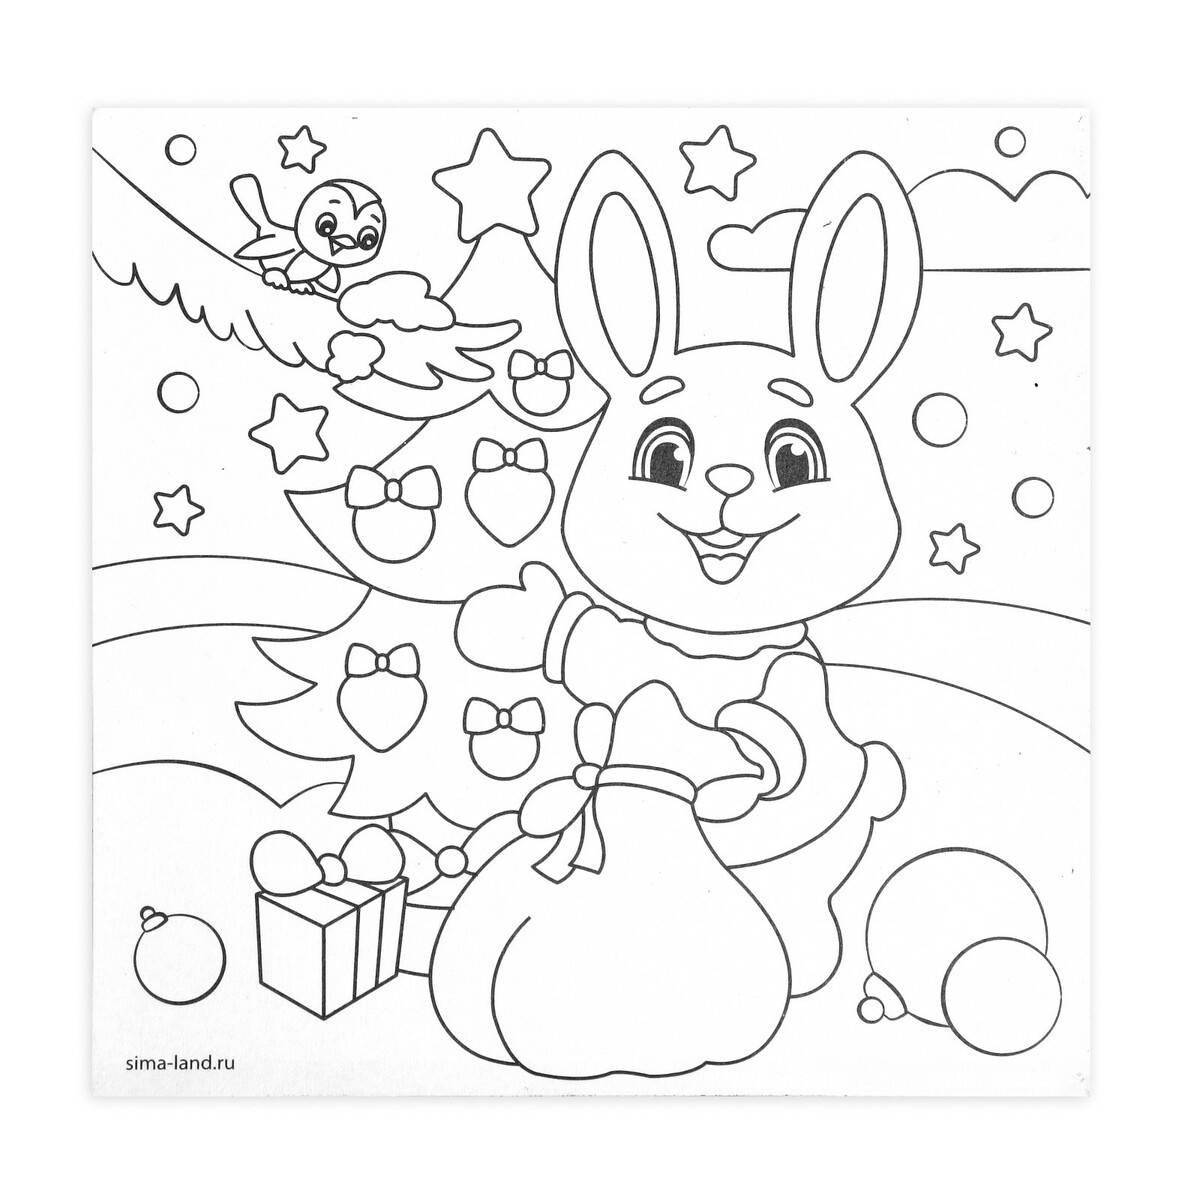 Coloring page elegant hare and tree